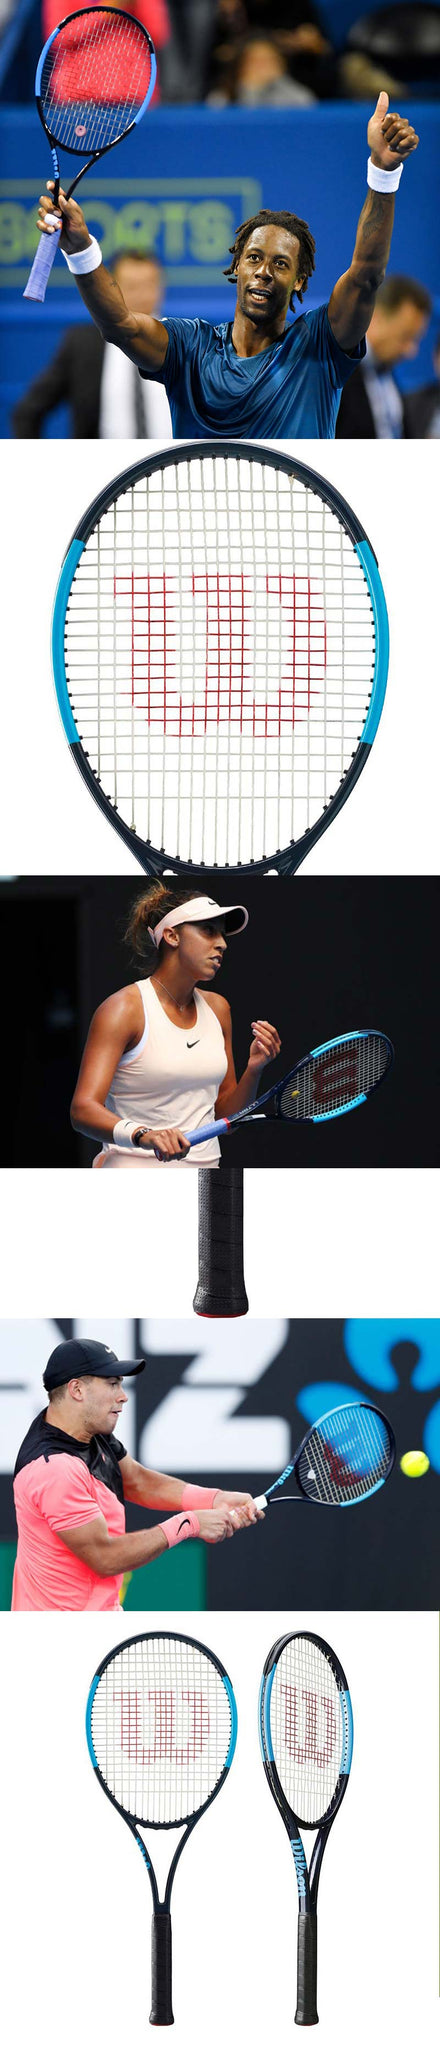 Wilson Ultra giveaway - Same racket used by Monfils, Coric and Madison keys 